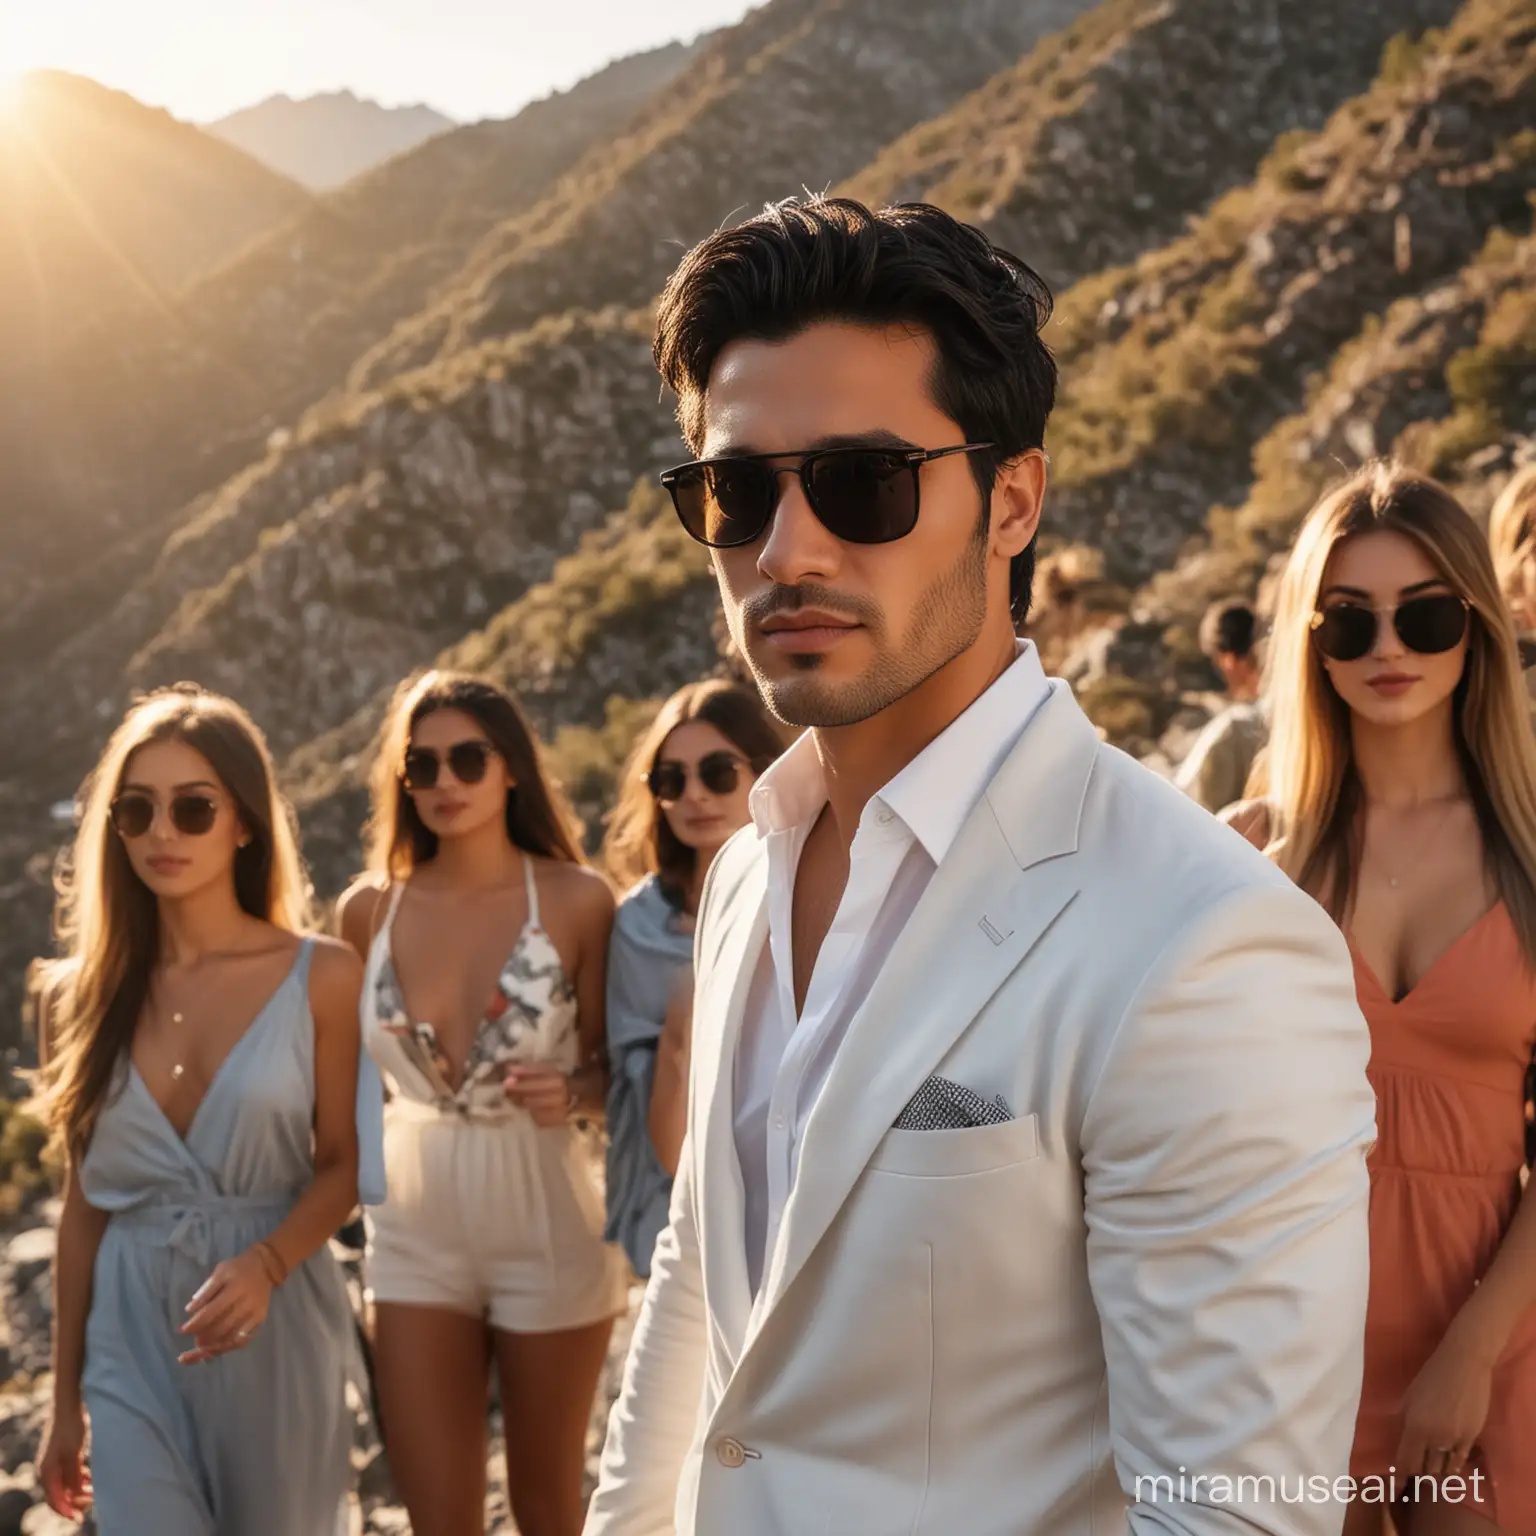 Elegant, handsome and wealthy man, with black hair and stubble, wearing sunglasses, with a group of girls, in a mountainous place with the setting sun. I want to focus on the man.